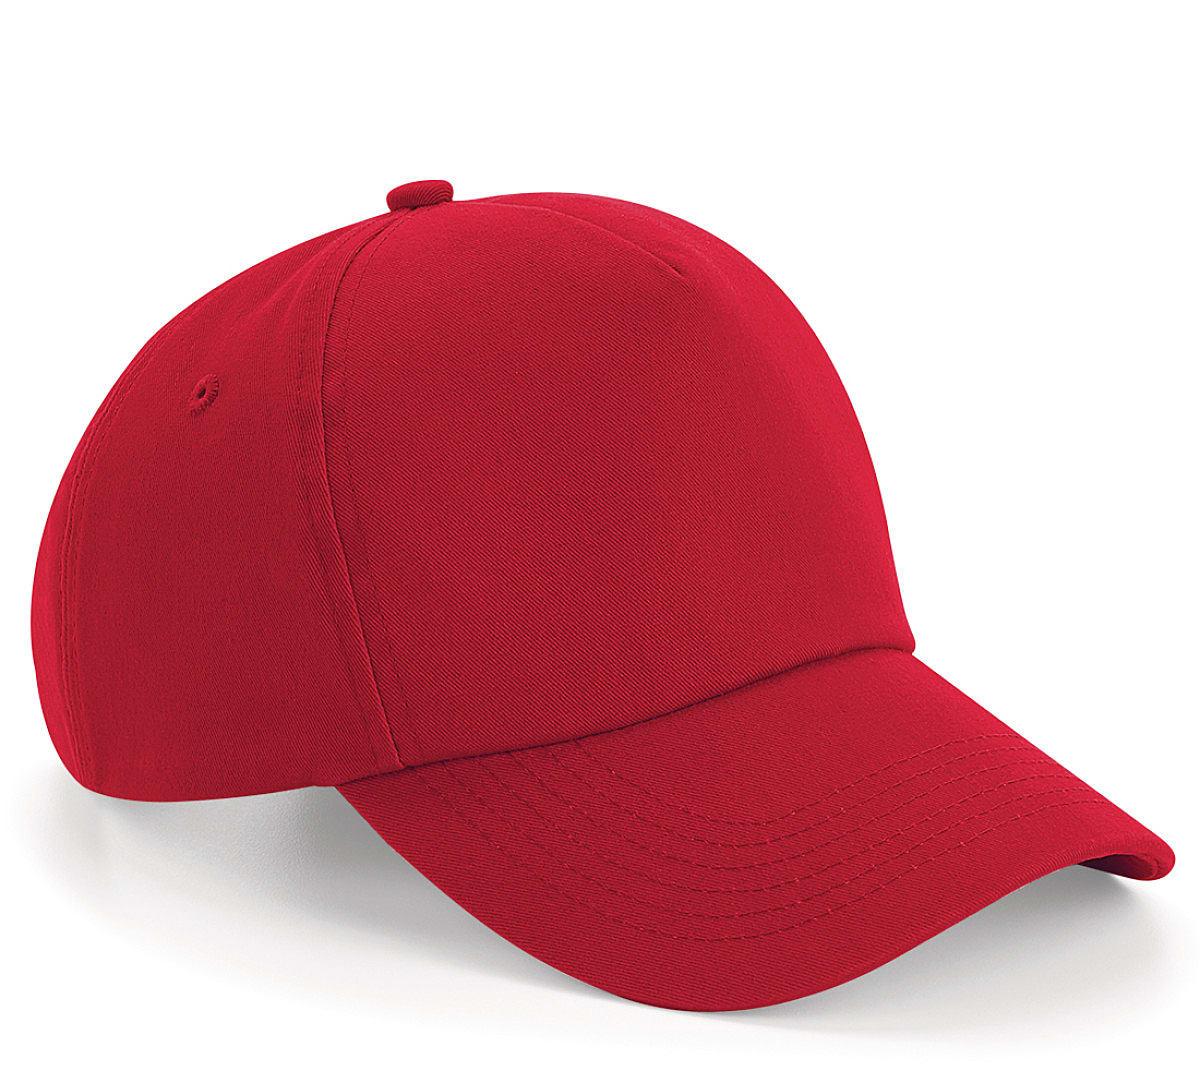 Beechfield Authentic 5 Panel Cap in Classic Red (Product Code: B25)